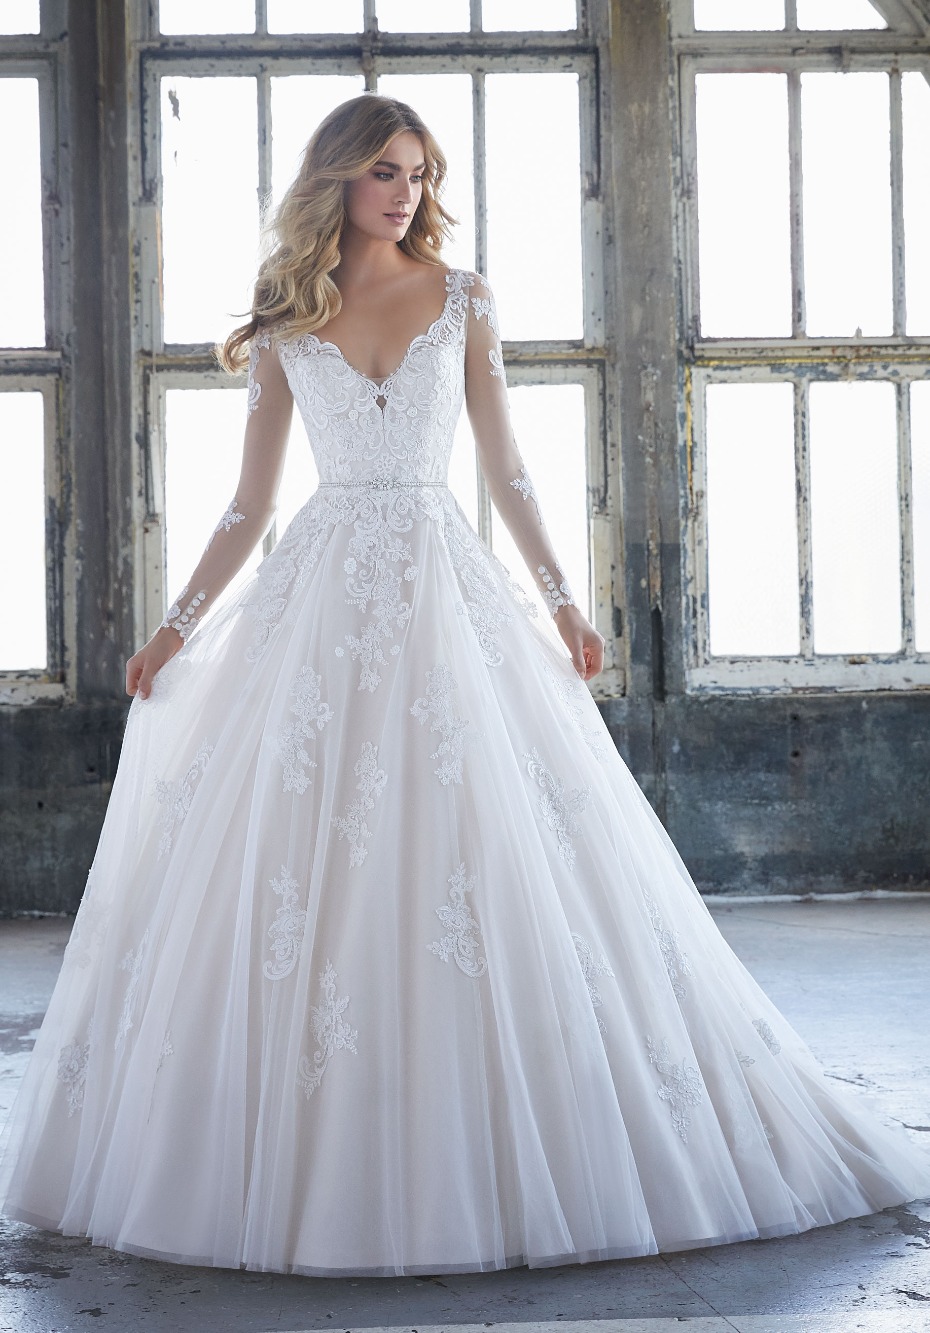 Morilee Trunk Show at Terry Costa